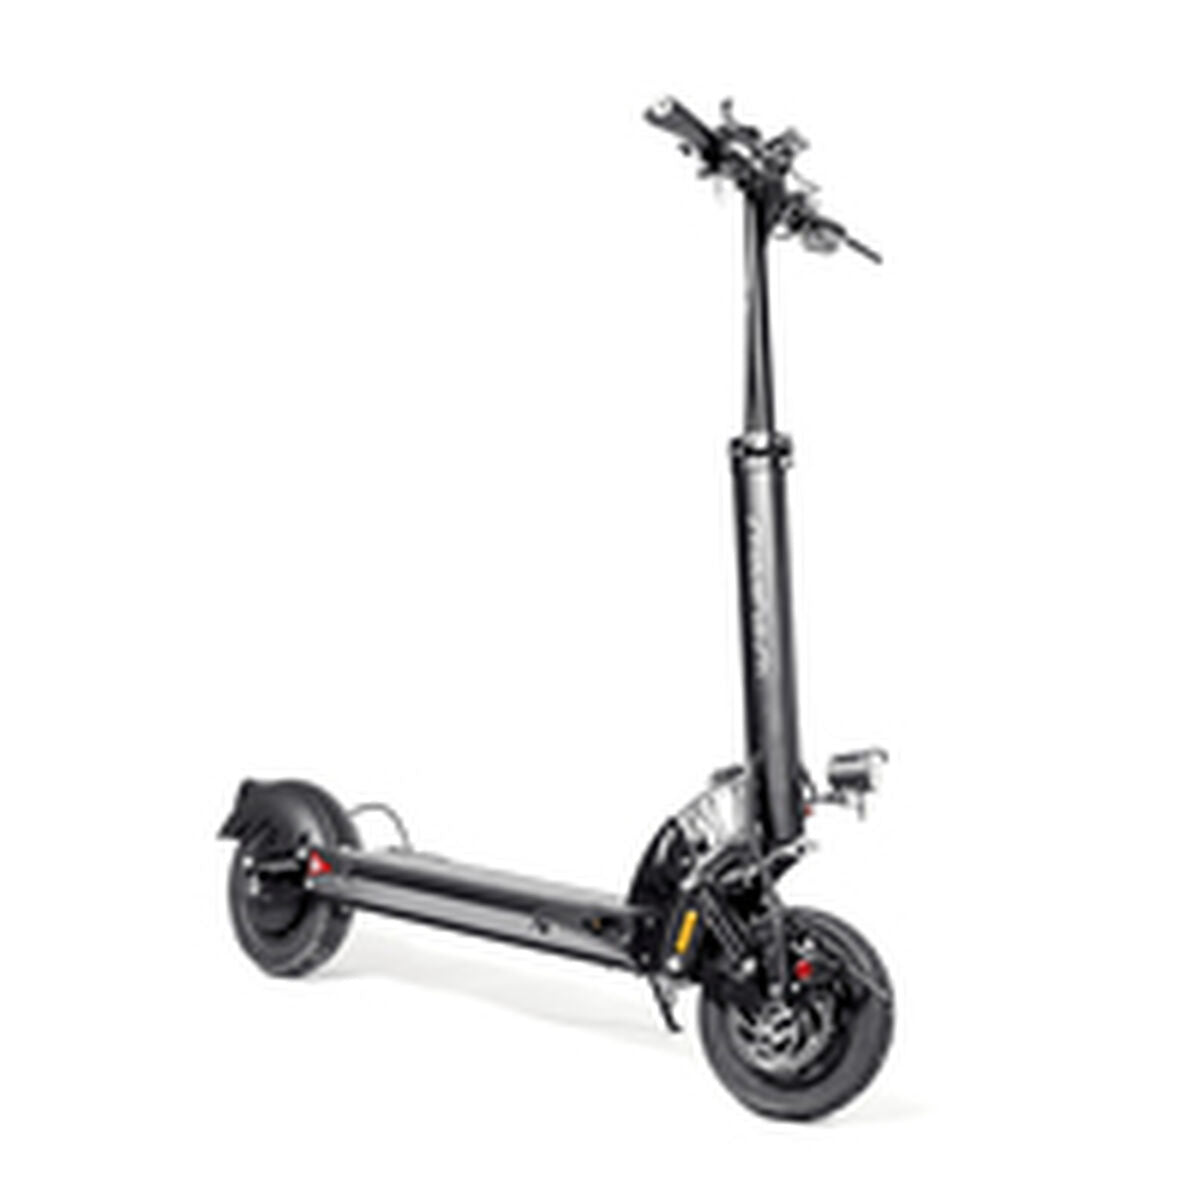 Electric Scooter Skate Flash SK URBAN DUAL PRO Black, Skate Flash, Sports and outdoors, Urban mobility, electric-scooter-skate-flash-sk-urban-dual-pro-black, Brand_Skate Flash, category-reference-2609, category-reference-2629, category-reference-2904, category-reference-t-19681, category-reference-t-19756, category-reference-t-19876, category-reference-t-21245, category-reference-t-25387, Condition_NEW, deportista / en forma, Price_900 - 1000, RiotNook